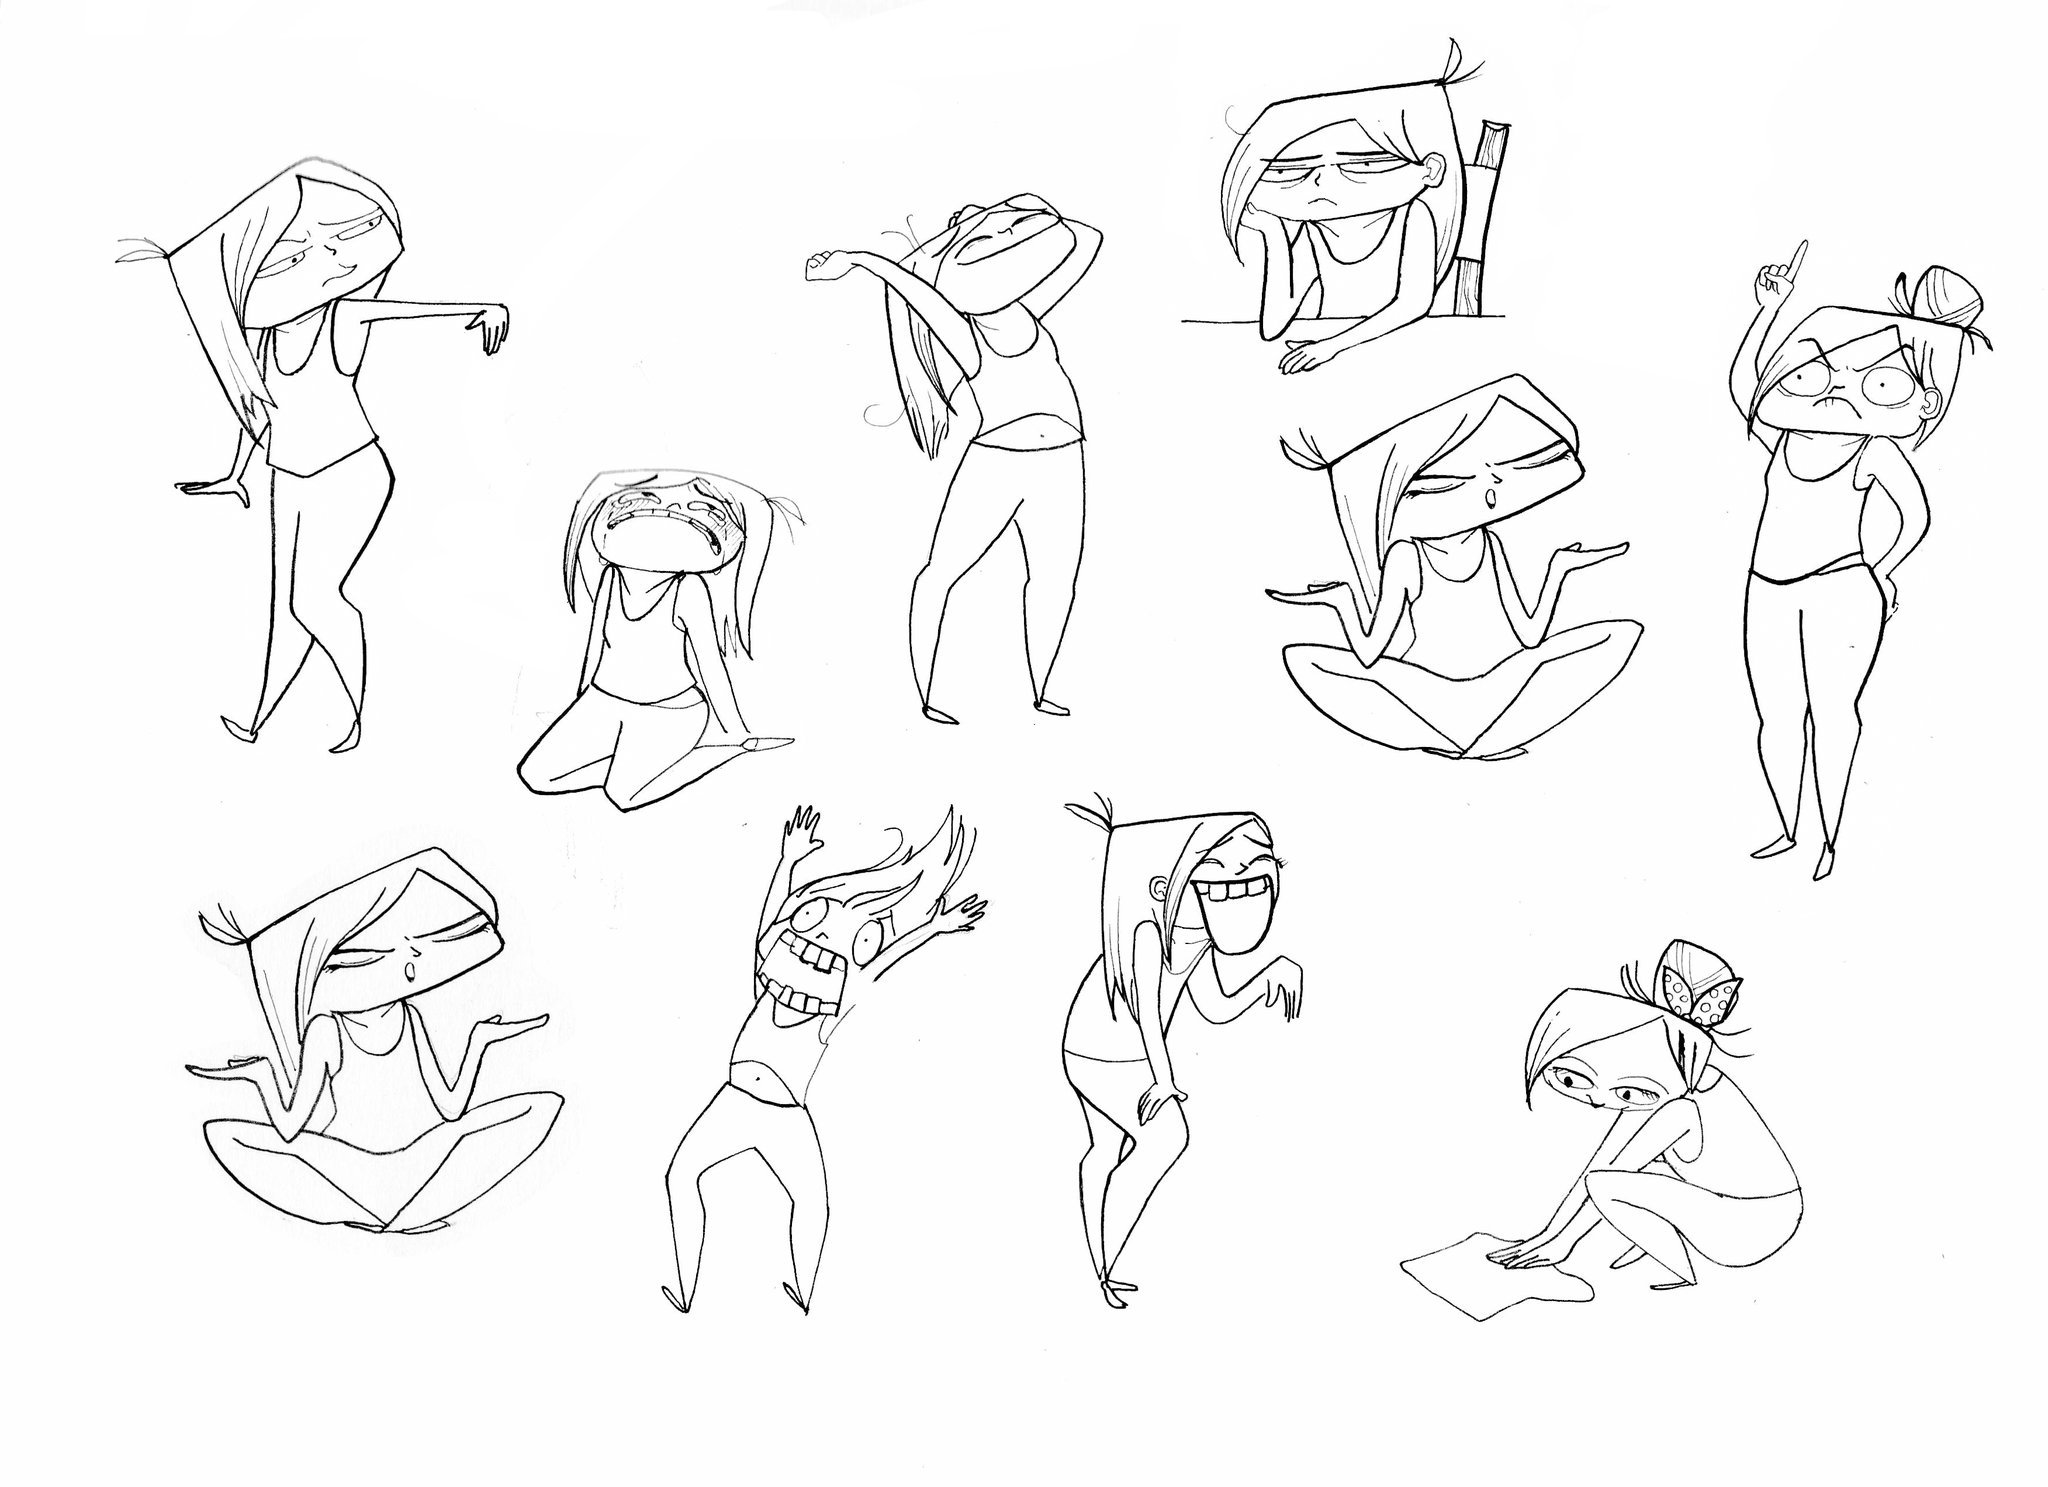 Emma Petermann Some Poses Of My Character Characterdesign Poses Girl Drawing Sketch Emmapetermann T Co K1s90dbkd1 Twitter